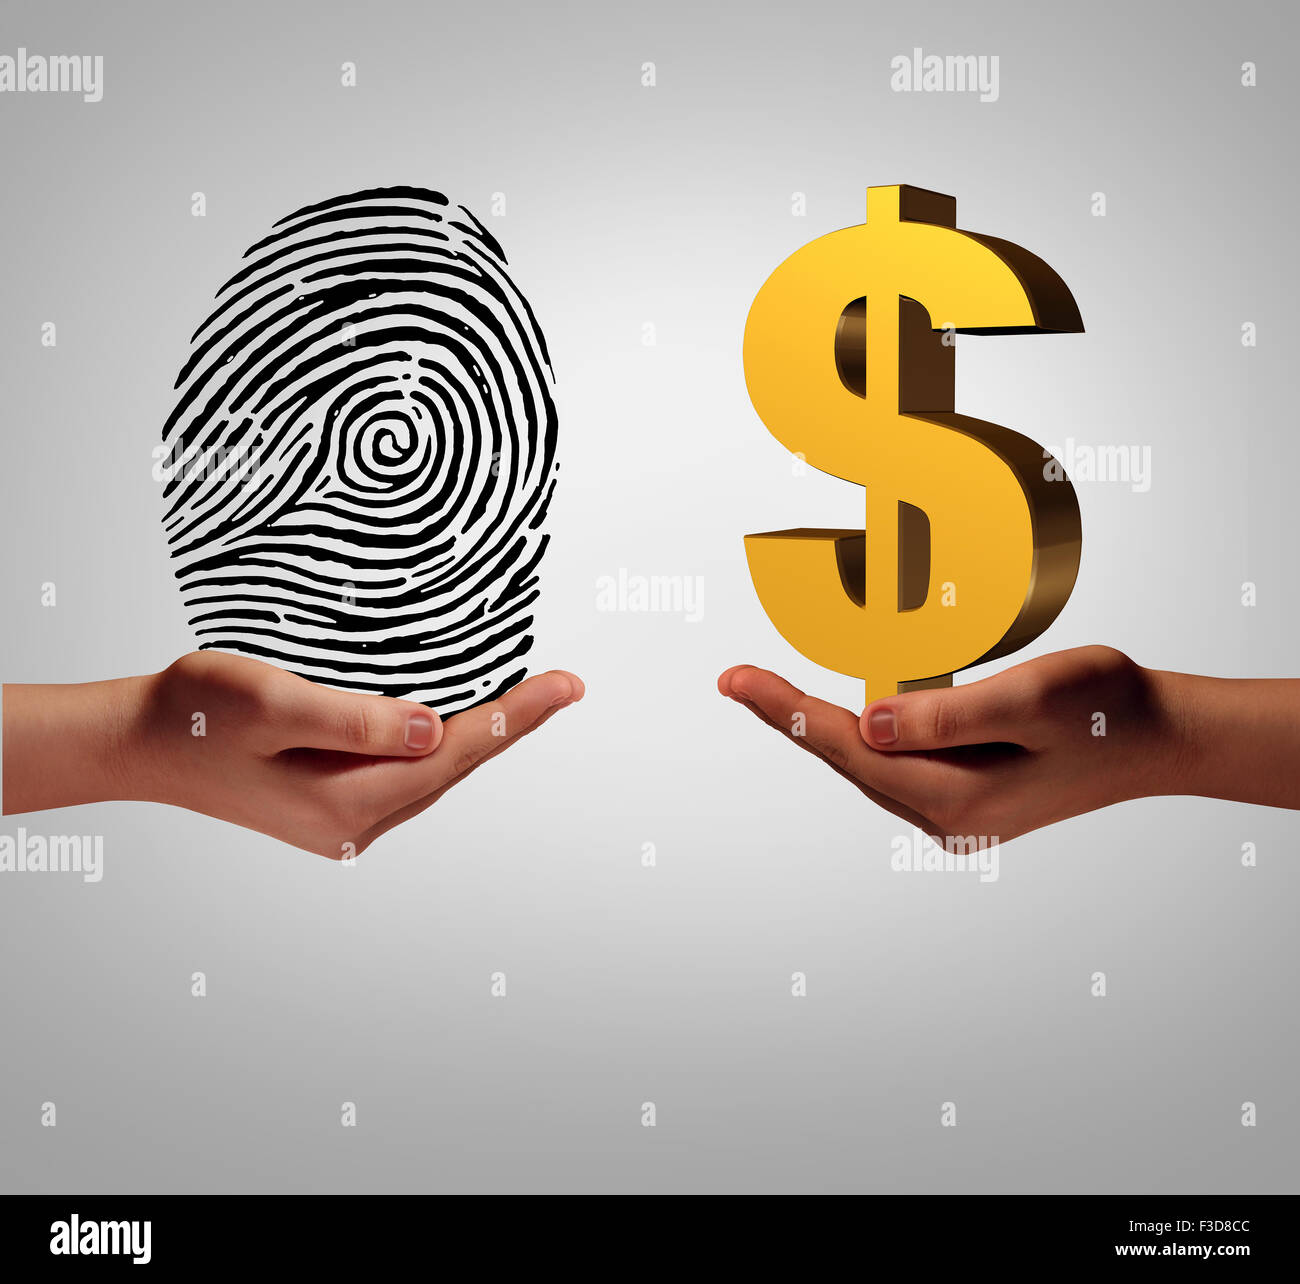 Personal data brokering business concept and buying and selling personal information as a hand holding a finger print and another person with a dollar symbol as a metaphor for a security identification access. Stock Photo